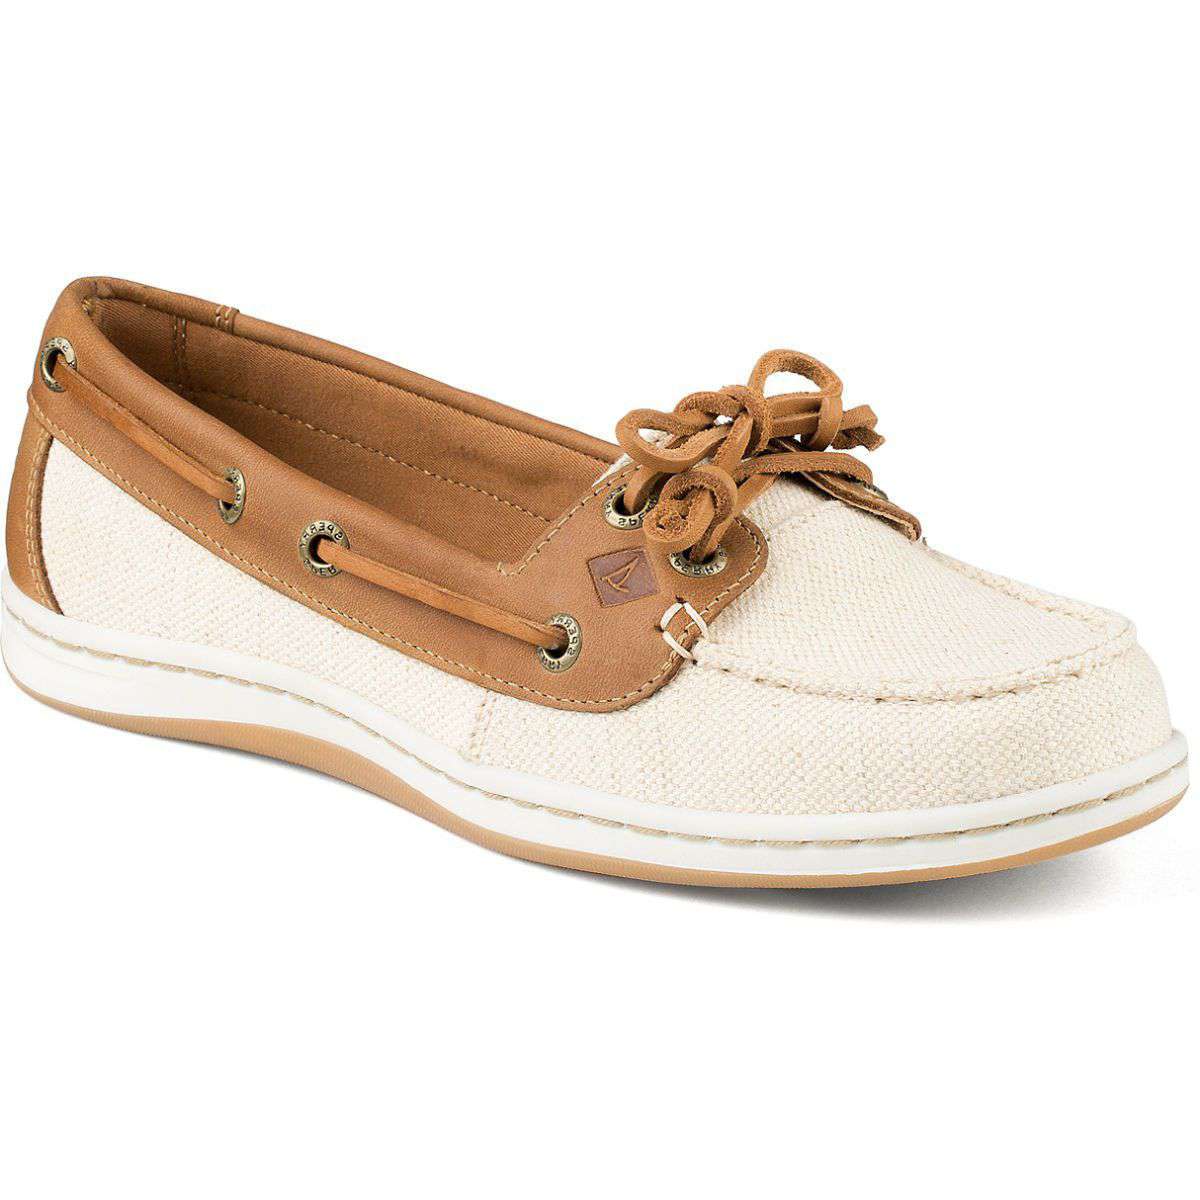 Women's Firefish Canvas Boat Shoe in Natural Tan by Sperry - Country Club Prep